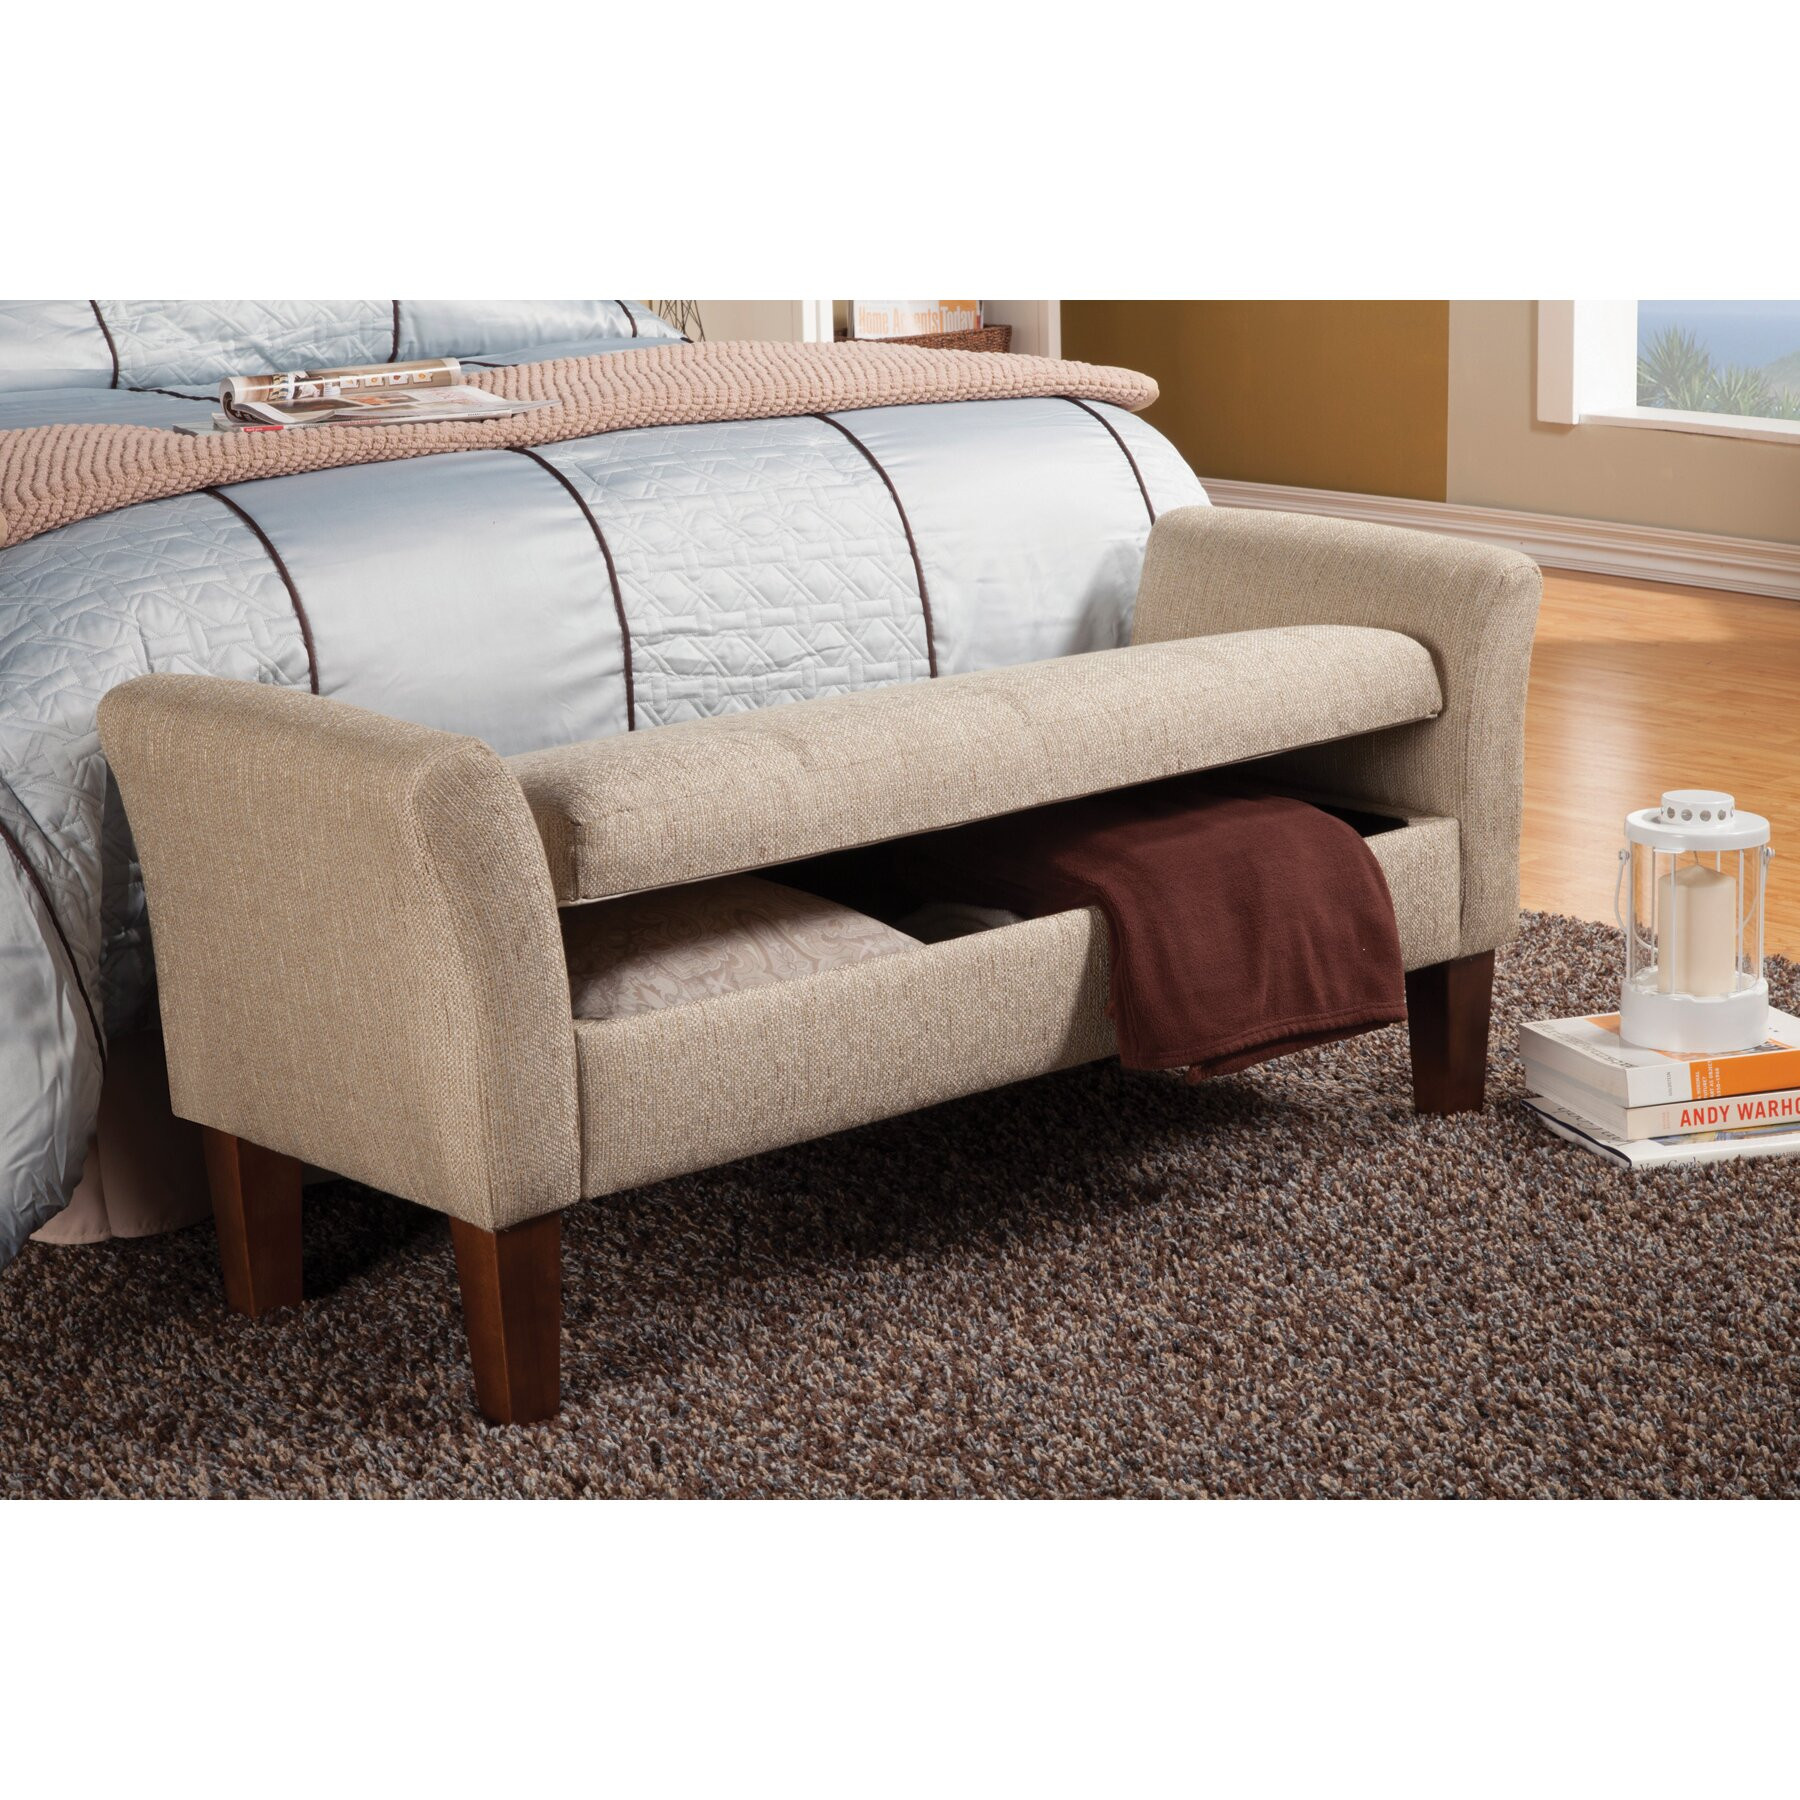 Bed Bench Storage
 Wildon Home Upholstered Storage Bedroom Bench & Reviews